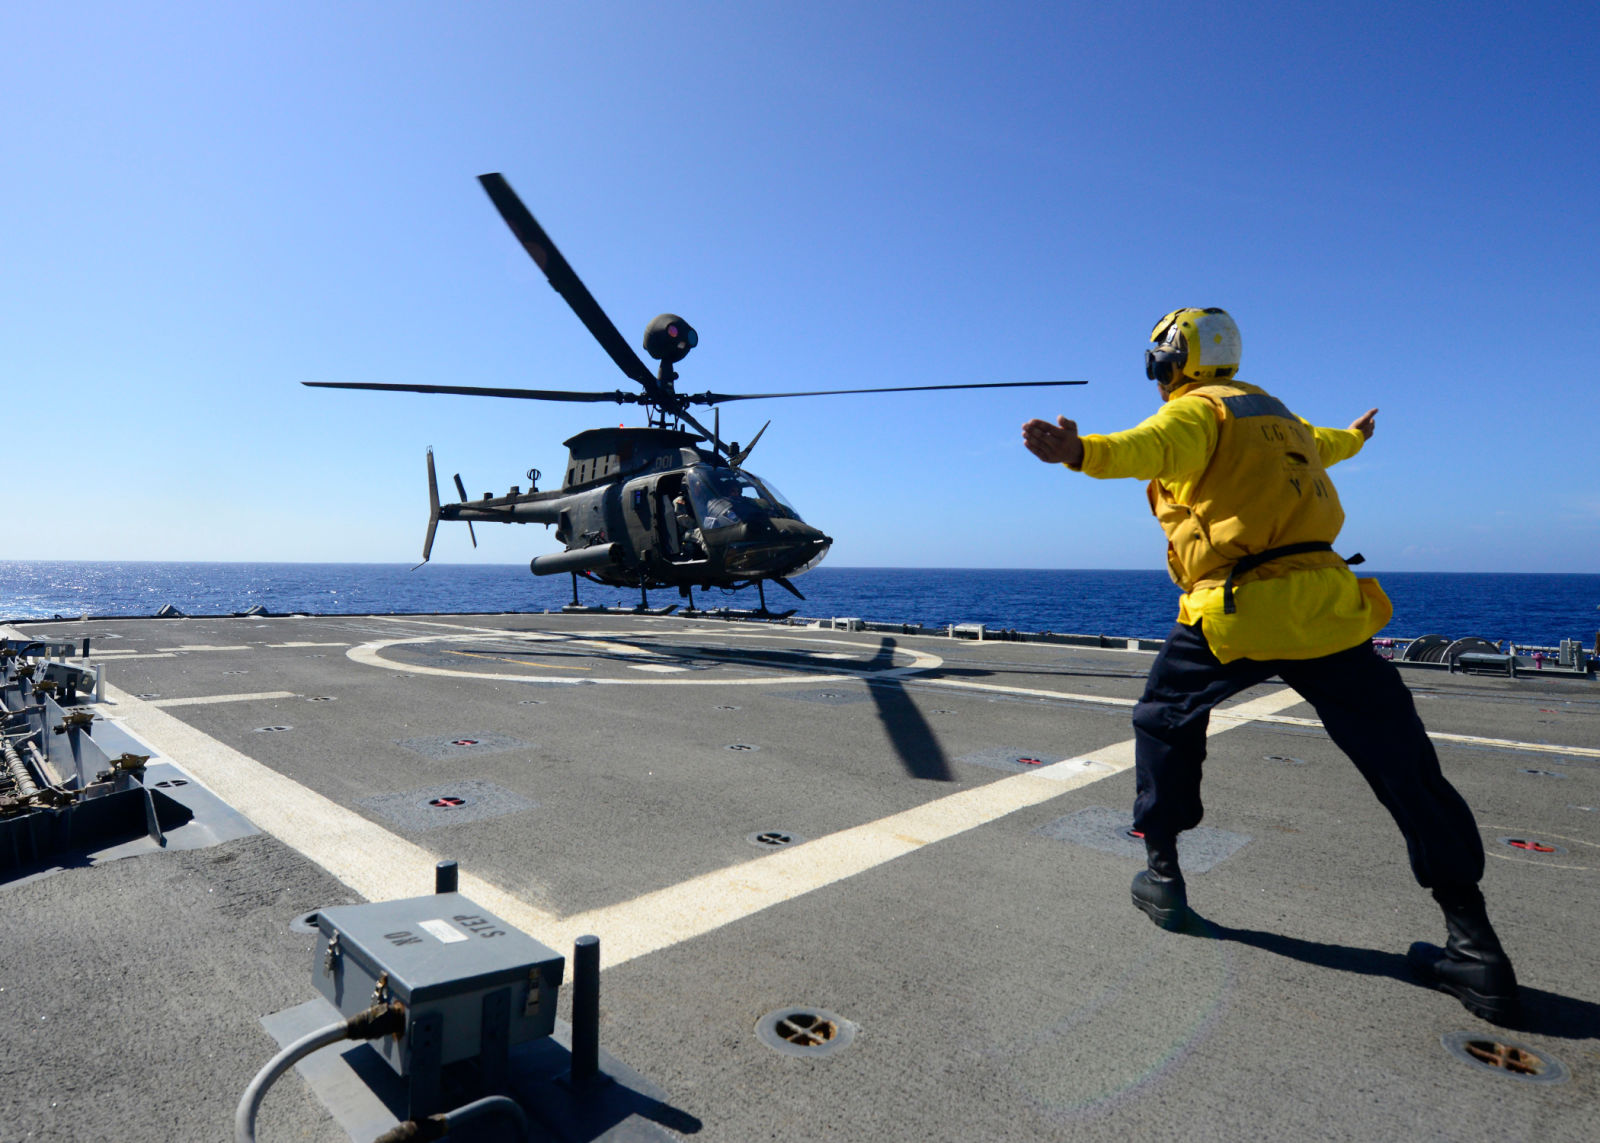 An OH-58D Kiowa Warrior operating from the USS Lake Erie during a joint-training operation.